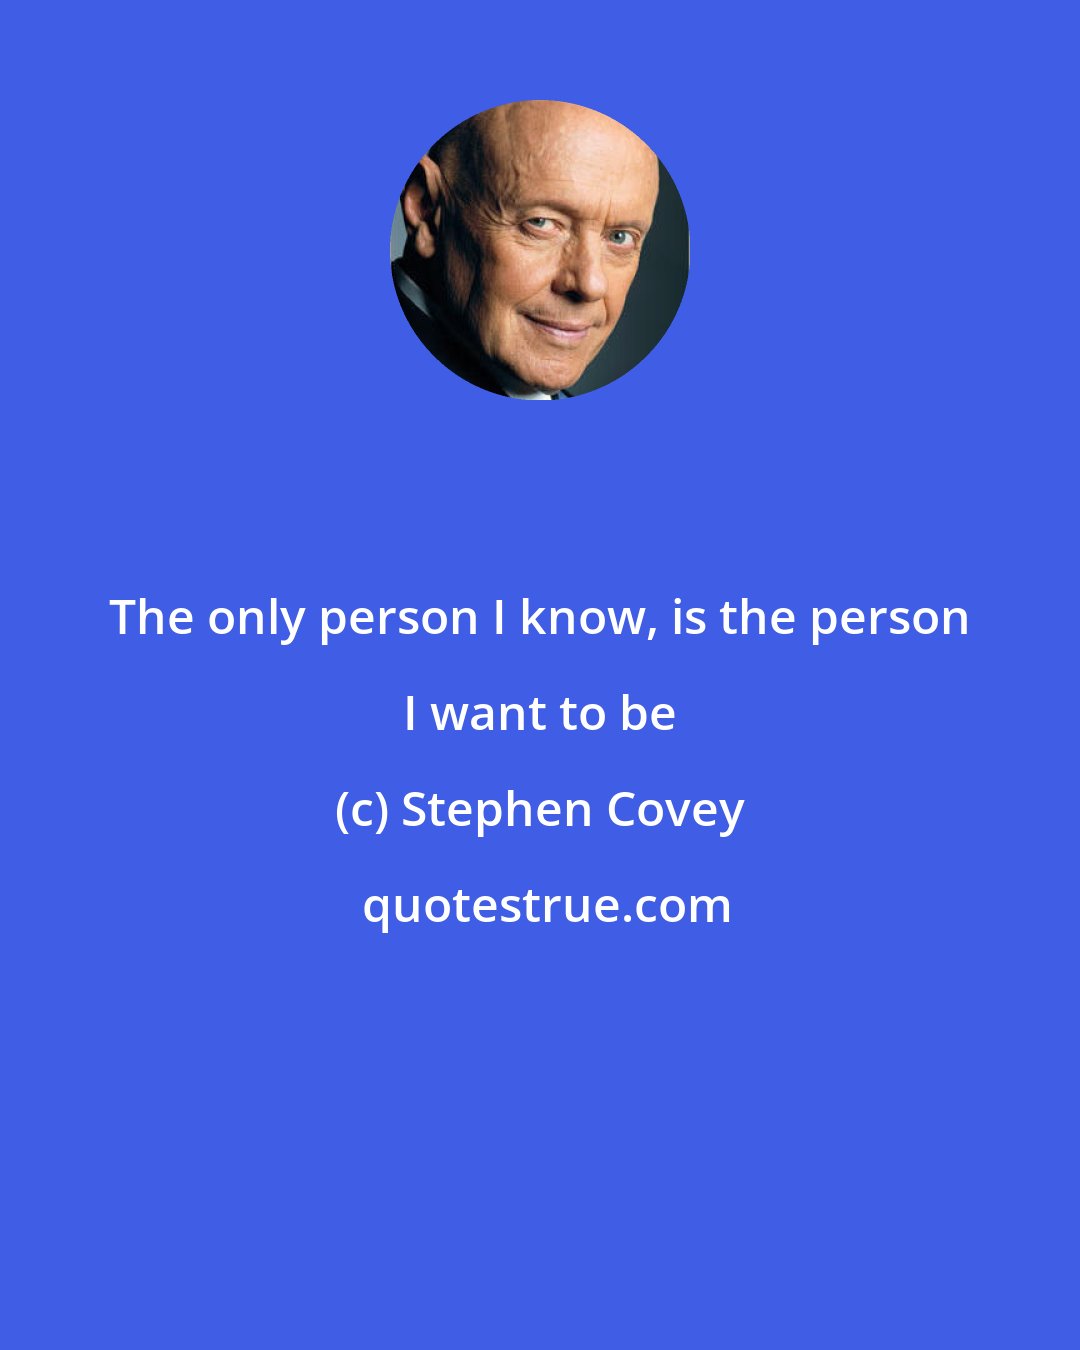 Stephen Covey: The only person I know, is the person I want to be